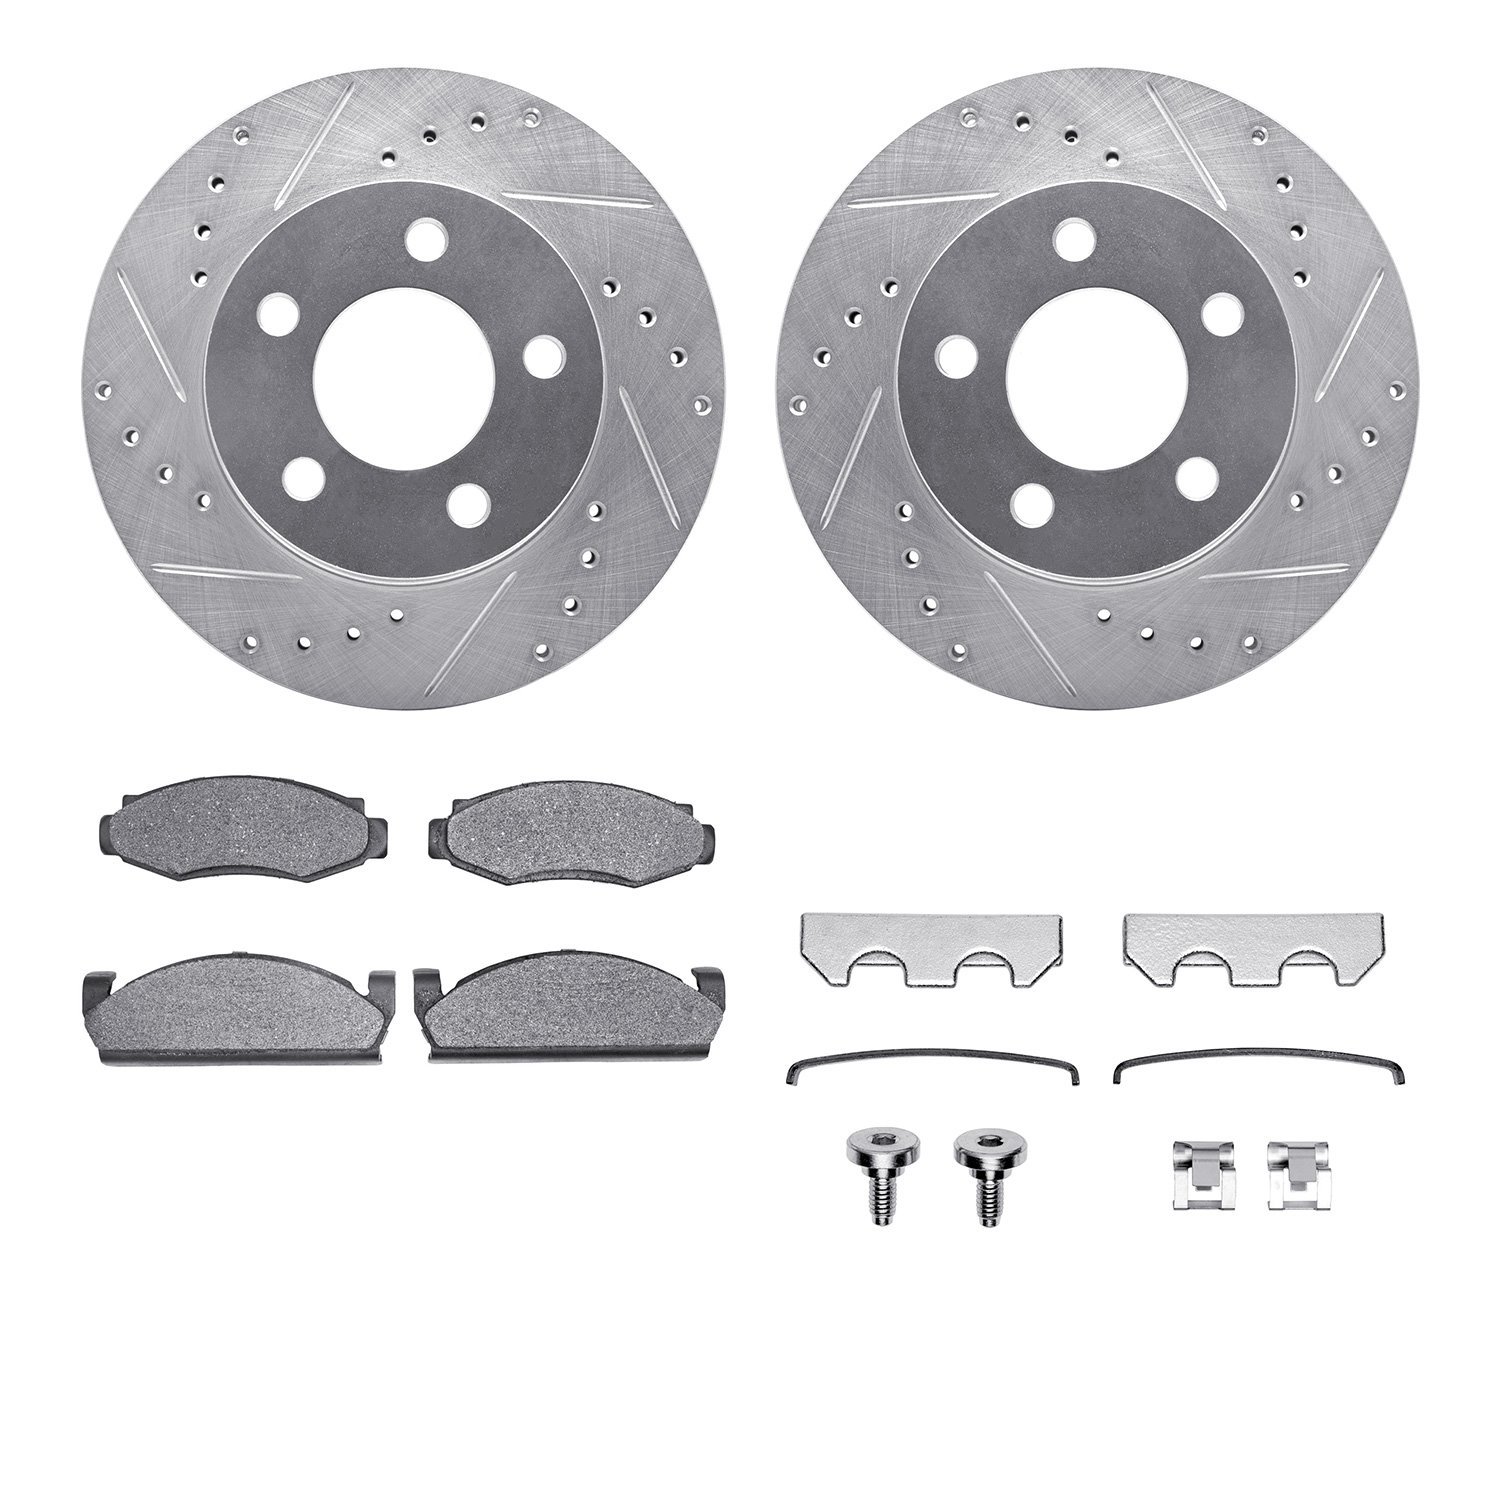 7412-42017 Drilled/Slotted Brake Rotors with Ultimate-Duty Brake Pads Kit & Hardware [Silver], 1980-1981 GM, Position: Front